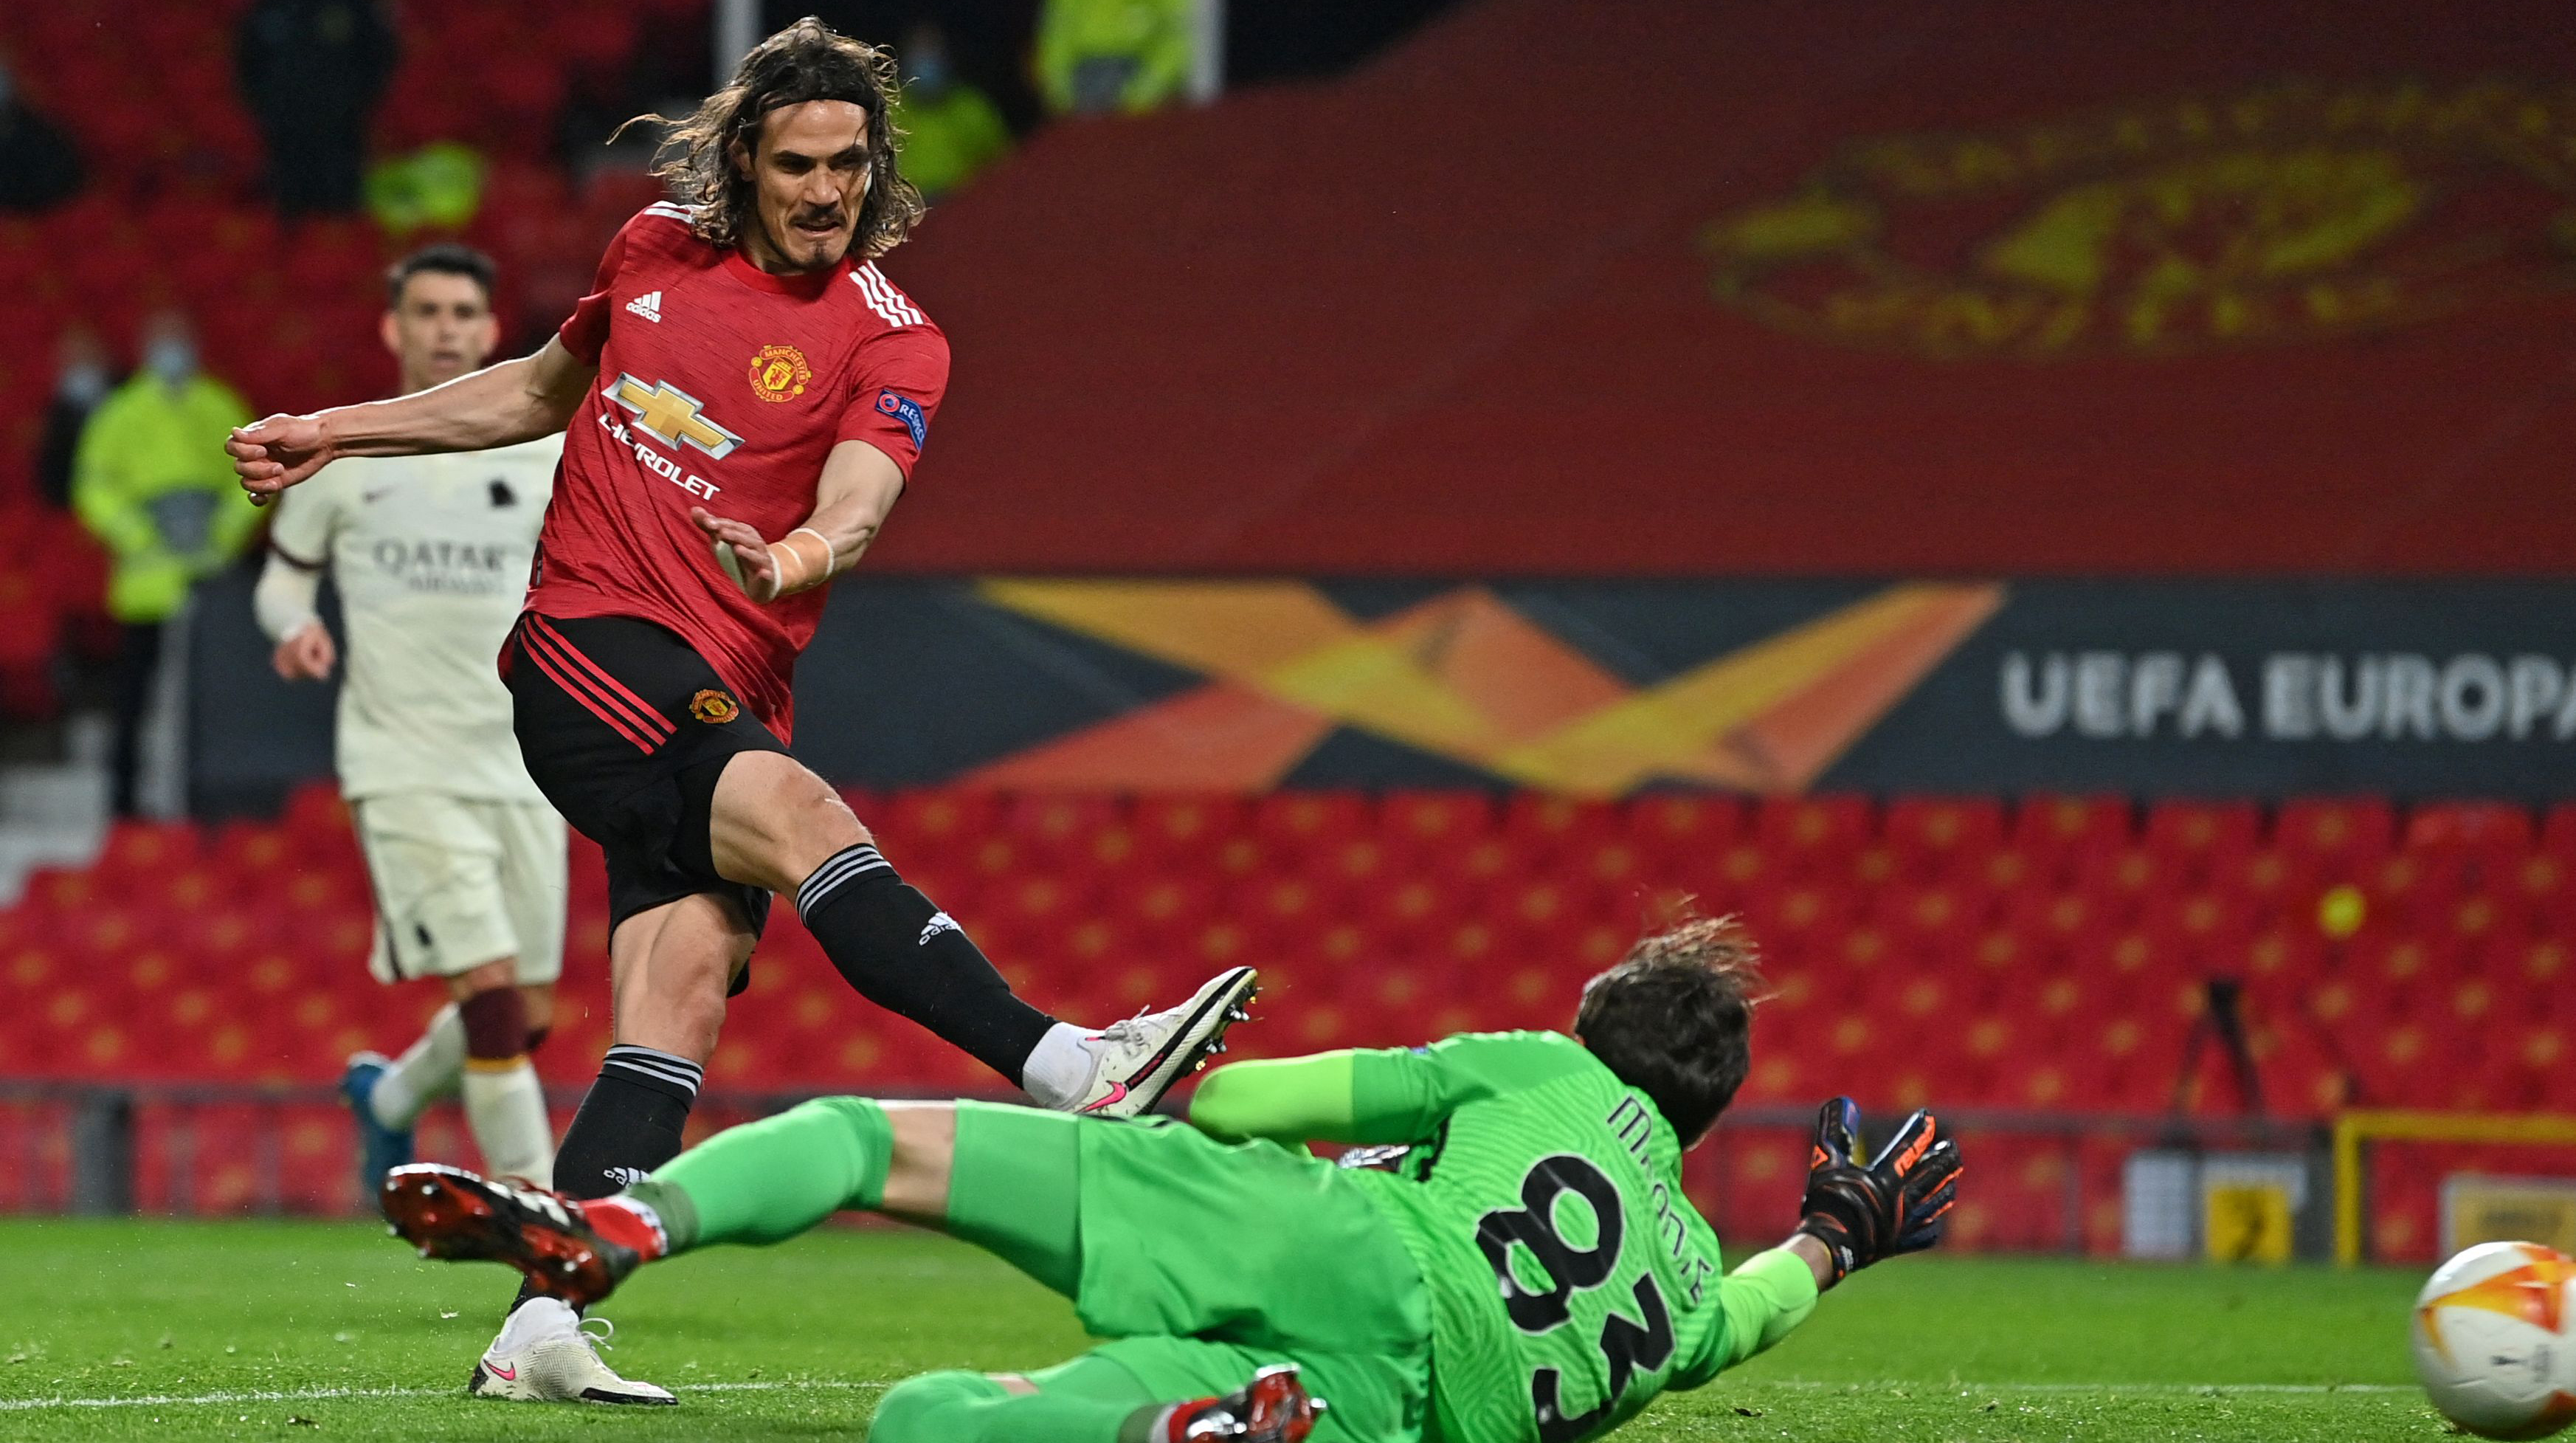 Manchester United's Uruguayan striker Edinson Cavani (L) shoots past Roma's Italian goalkeeper Antonio Mirante to score their third goal during the UEFA Europa League semi-final, first leg football match between Manchester United and Roma at Old Trafford stadium in Manchester, north west England, on April 29, 2021.